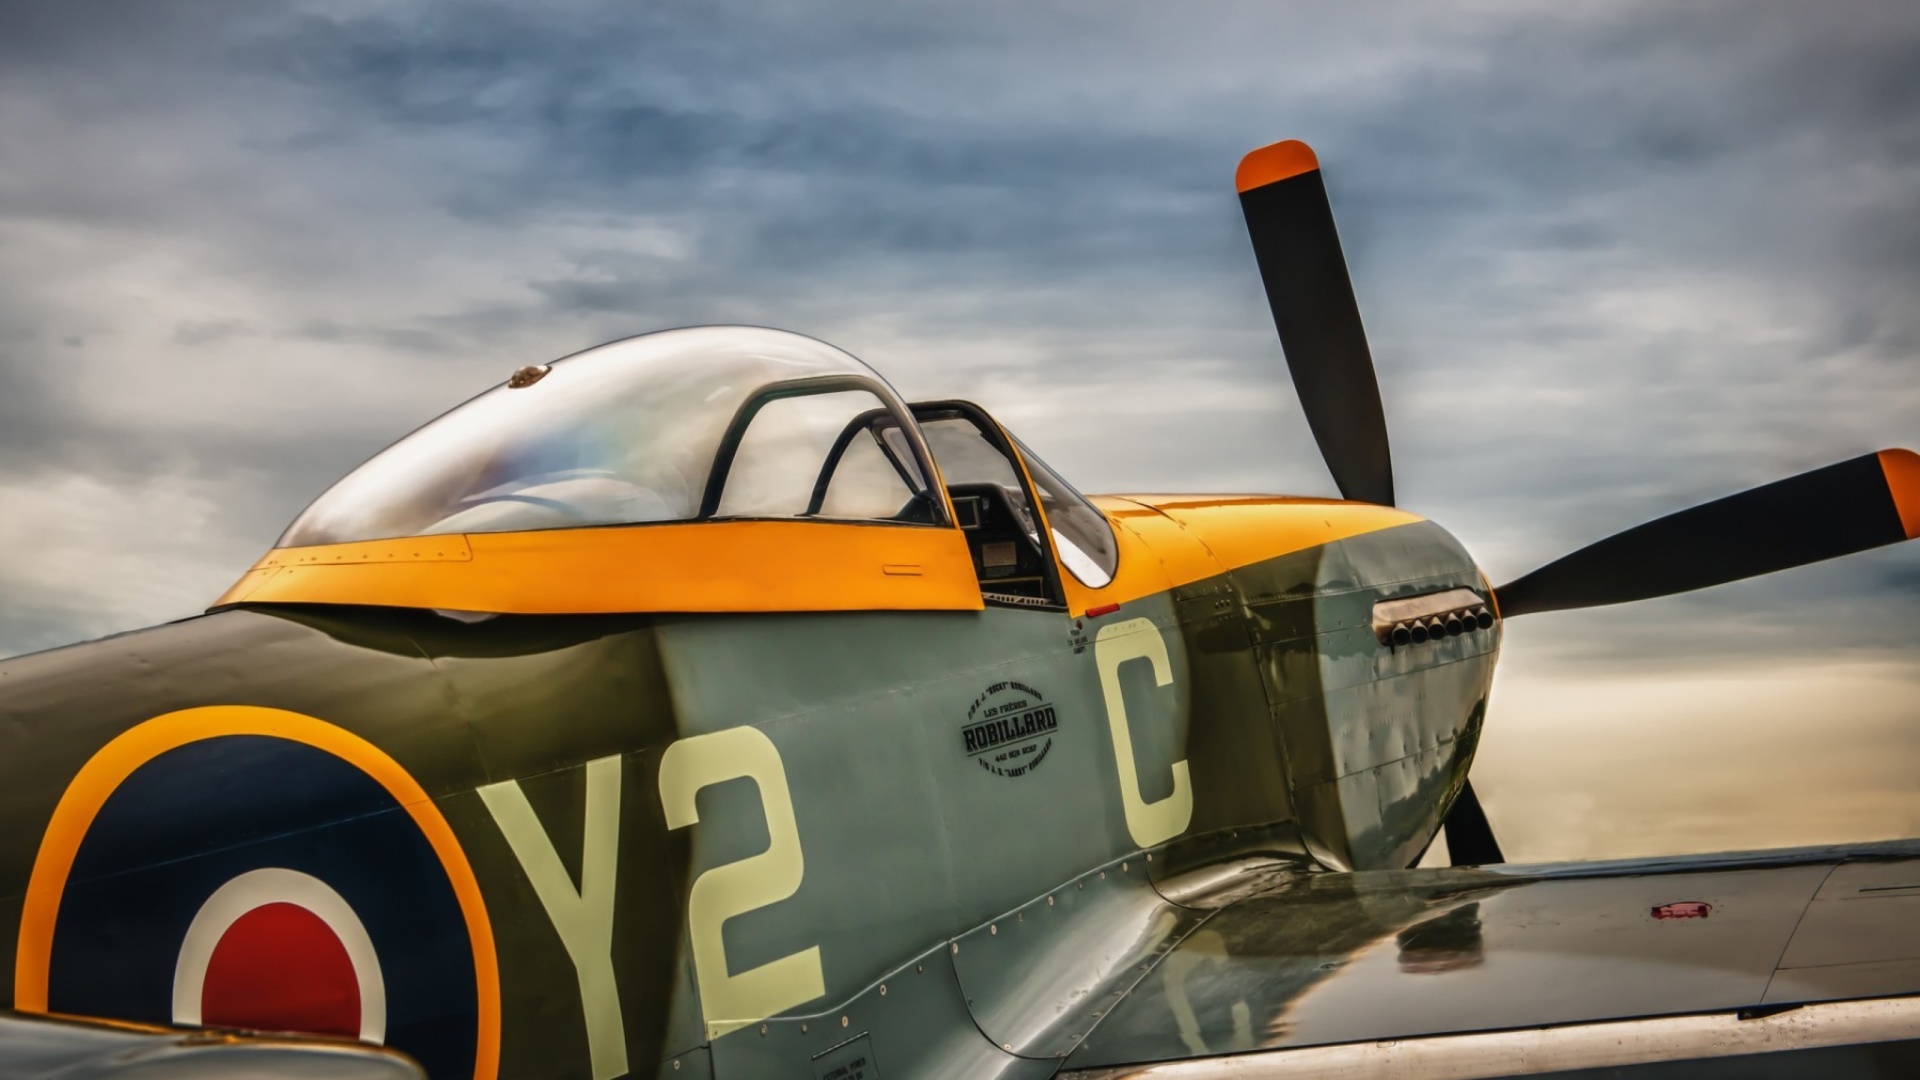 North American P 51 Mustang Air Fighter in World War 2 wallpaper 1920x1080